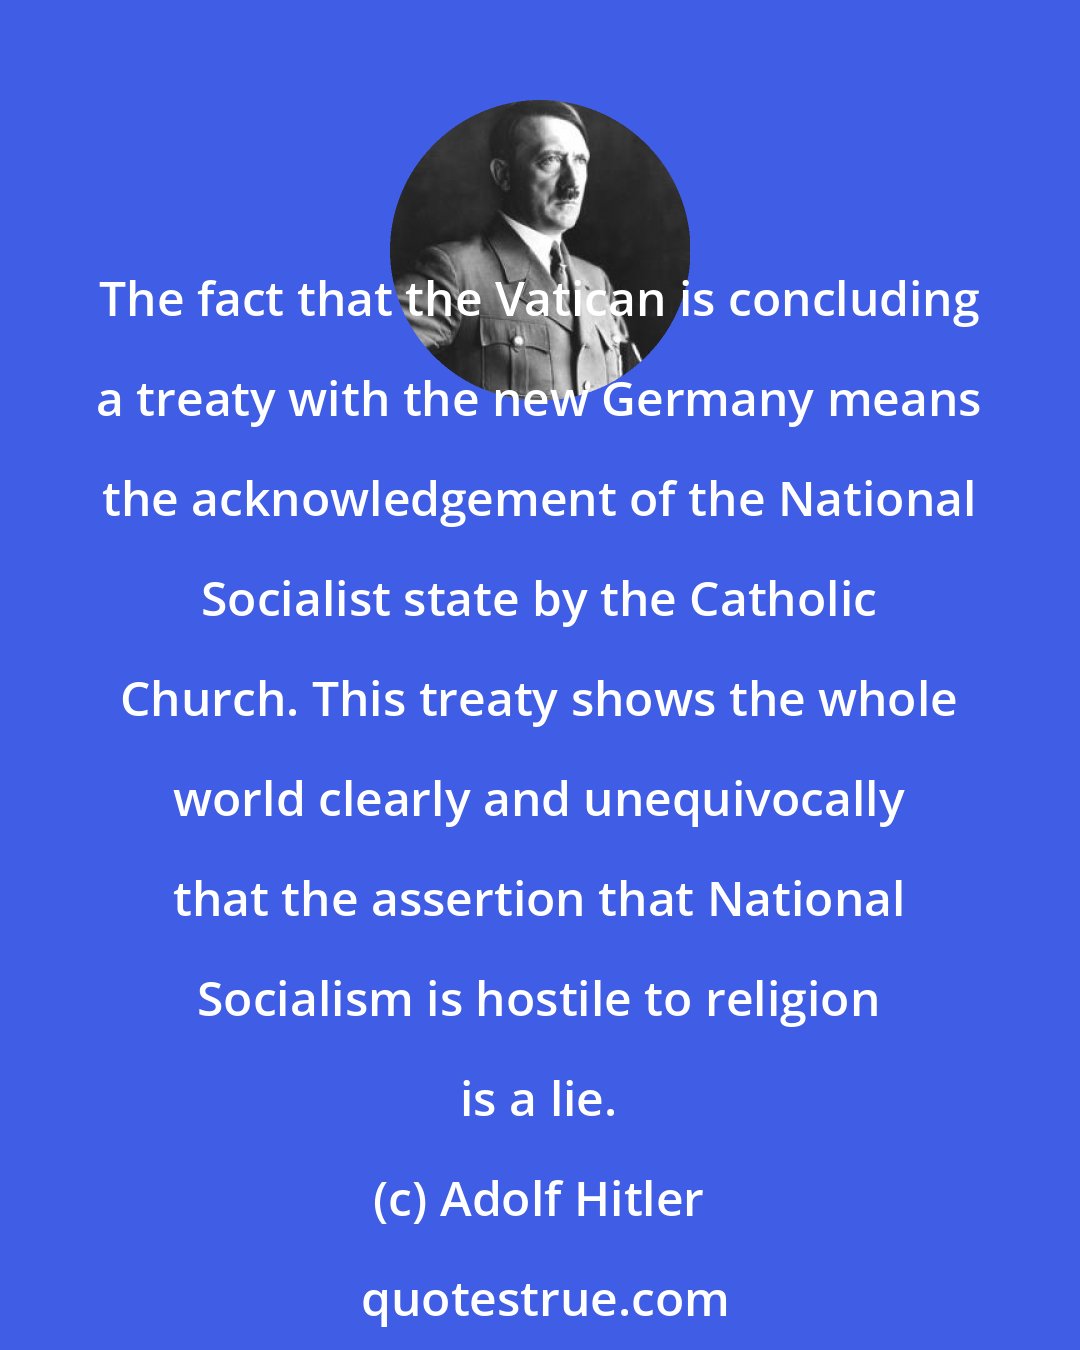 Adolf Hitler: The fact that the Vatican is concluding a treaty with the new Germany means the acknowledgement of the National Socialist state by the Catholic Church. This treaty shows the whole world clearly and unequivocally that the assertion that National Socialism is hostile to religion is a lie.